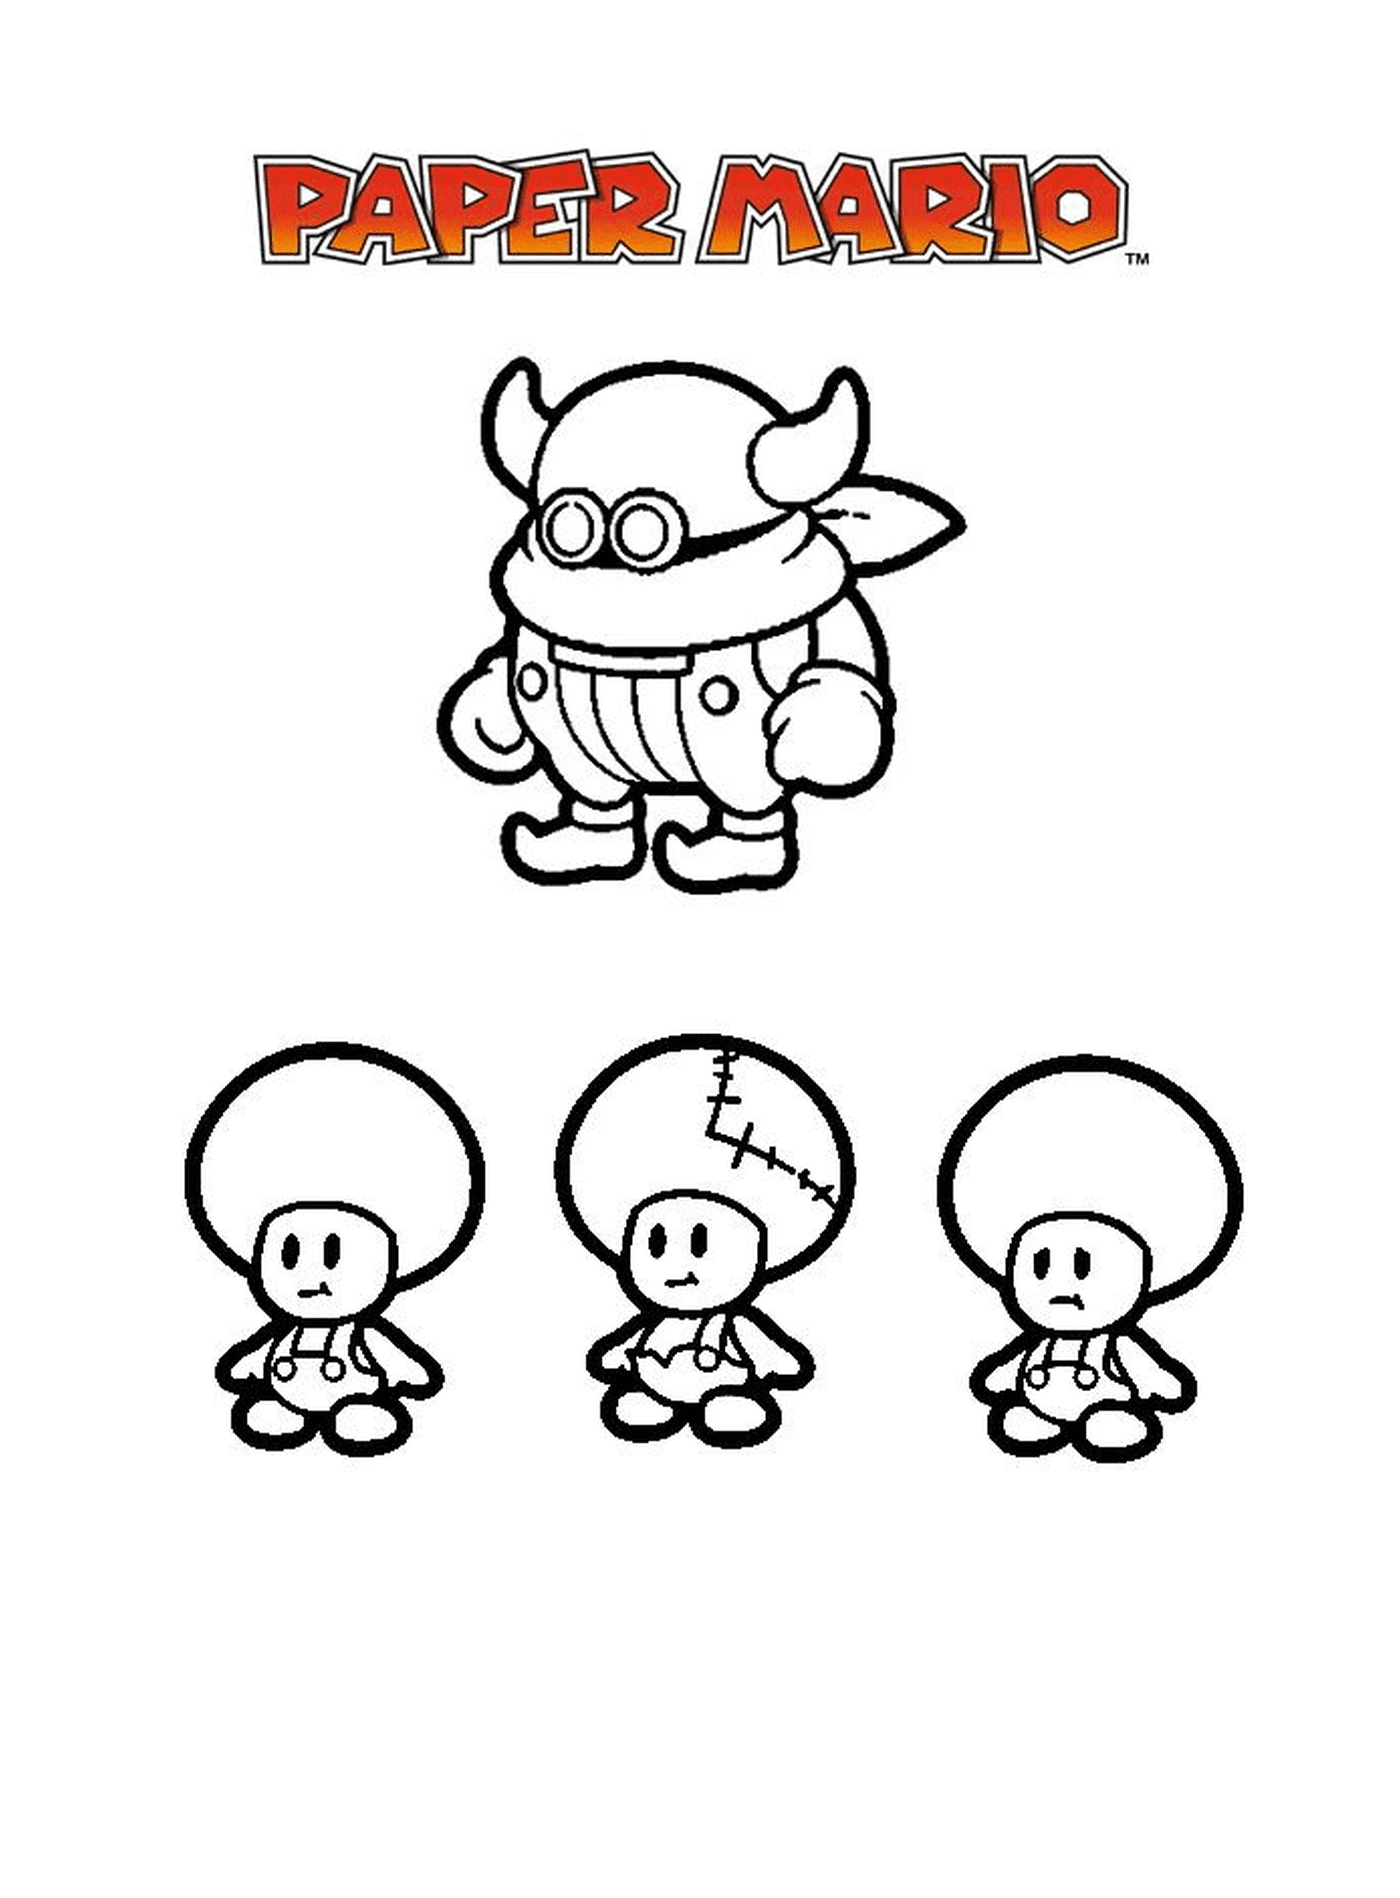  Mario Paper Millennial 10, a cartoon character with three different stages of development 